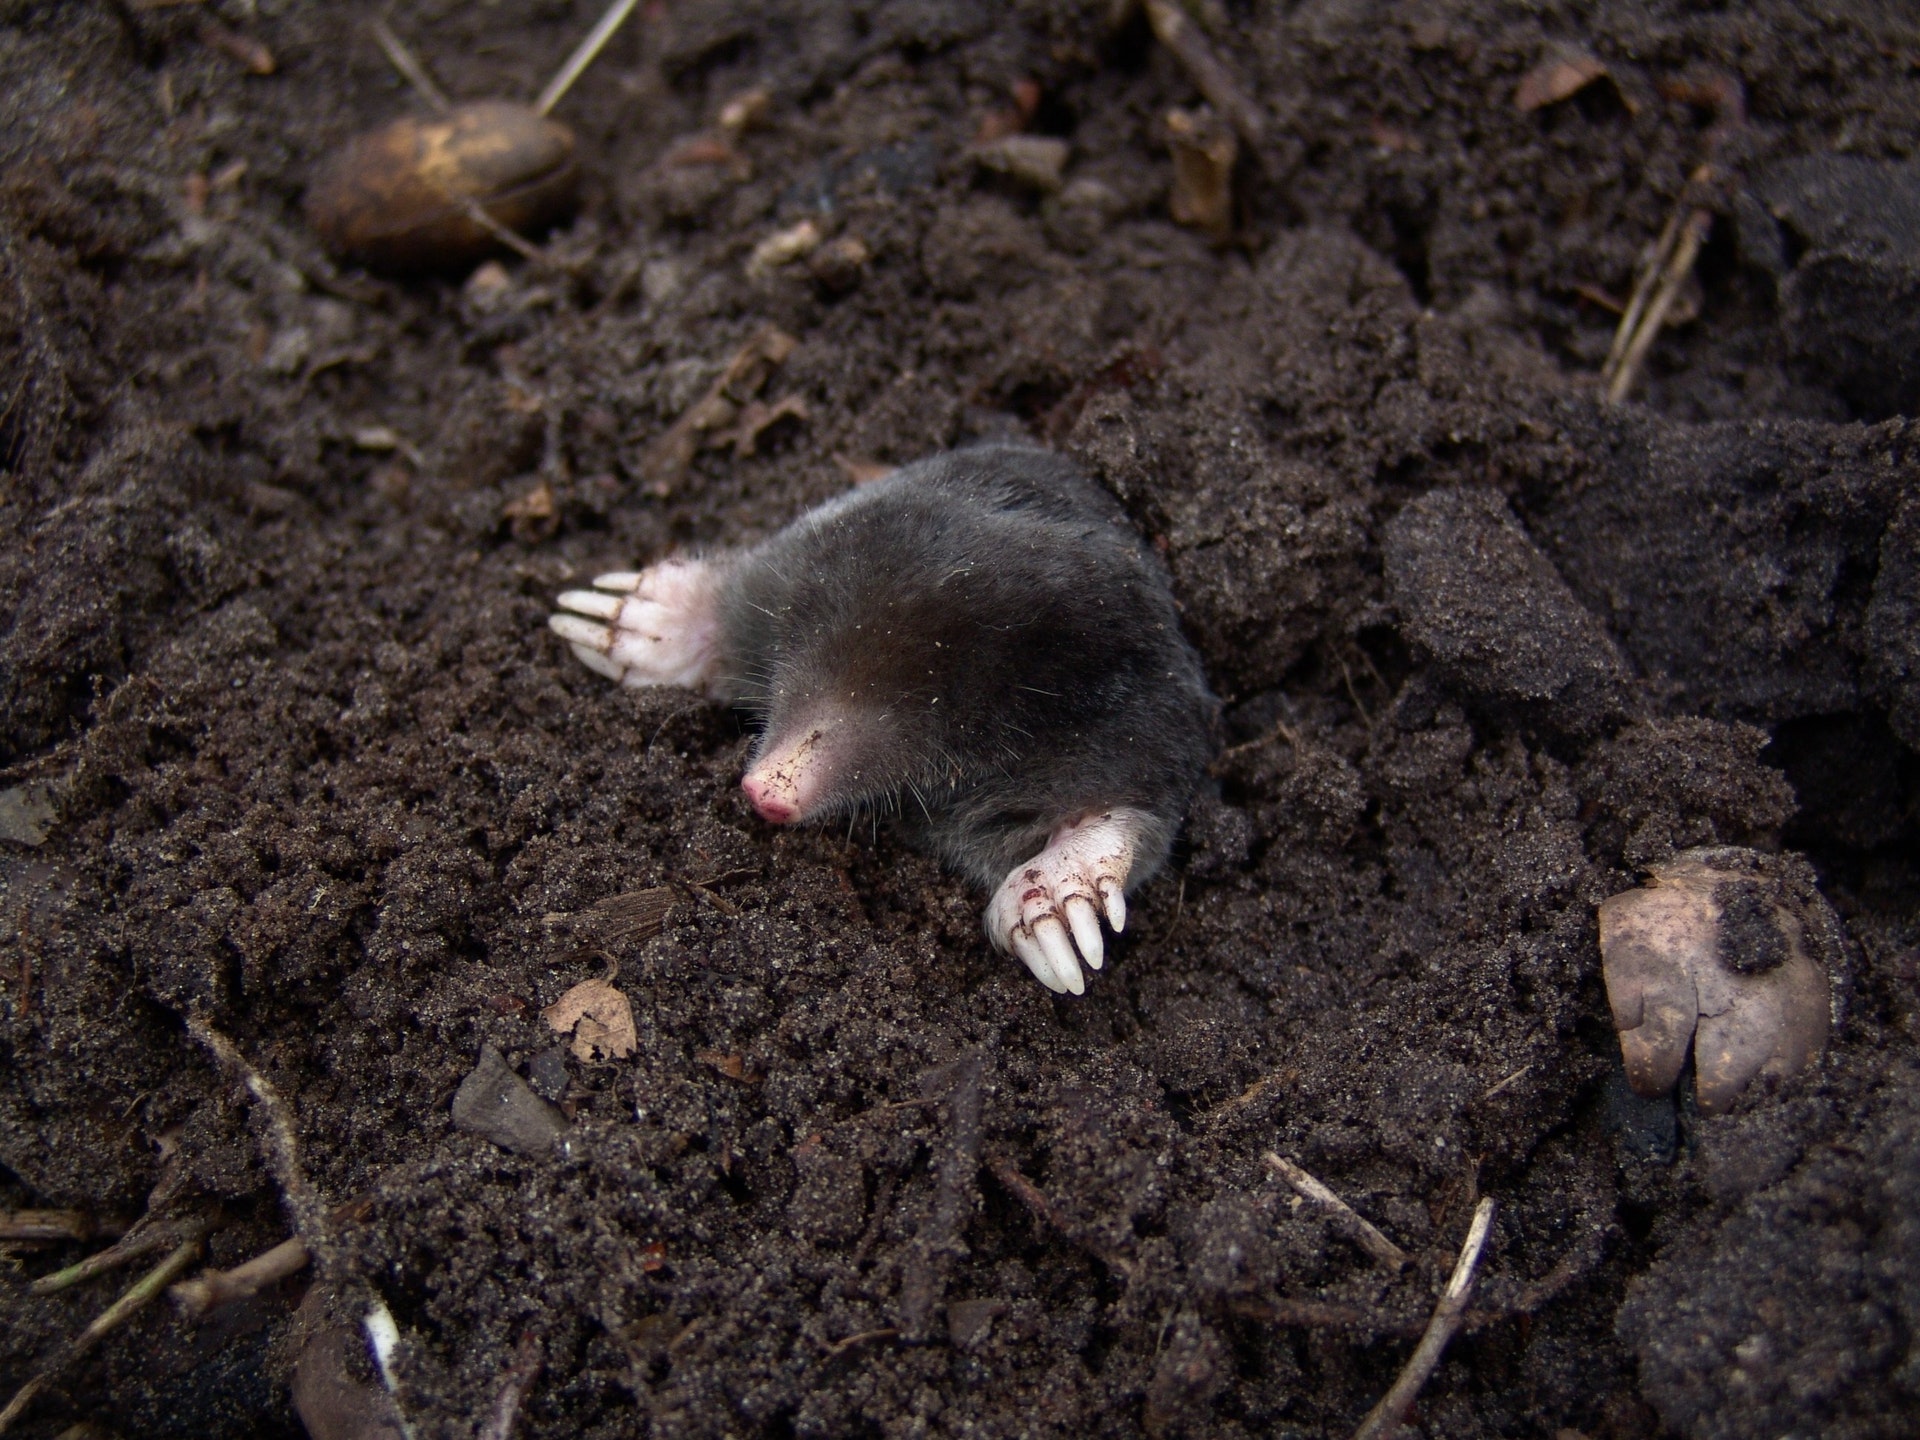 A mole that has caused damage to a garden